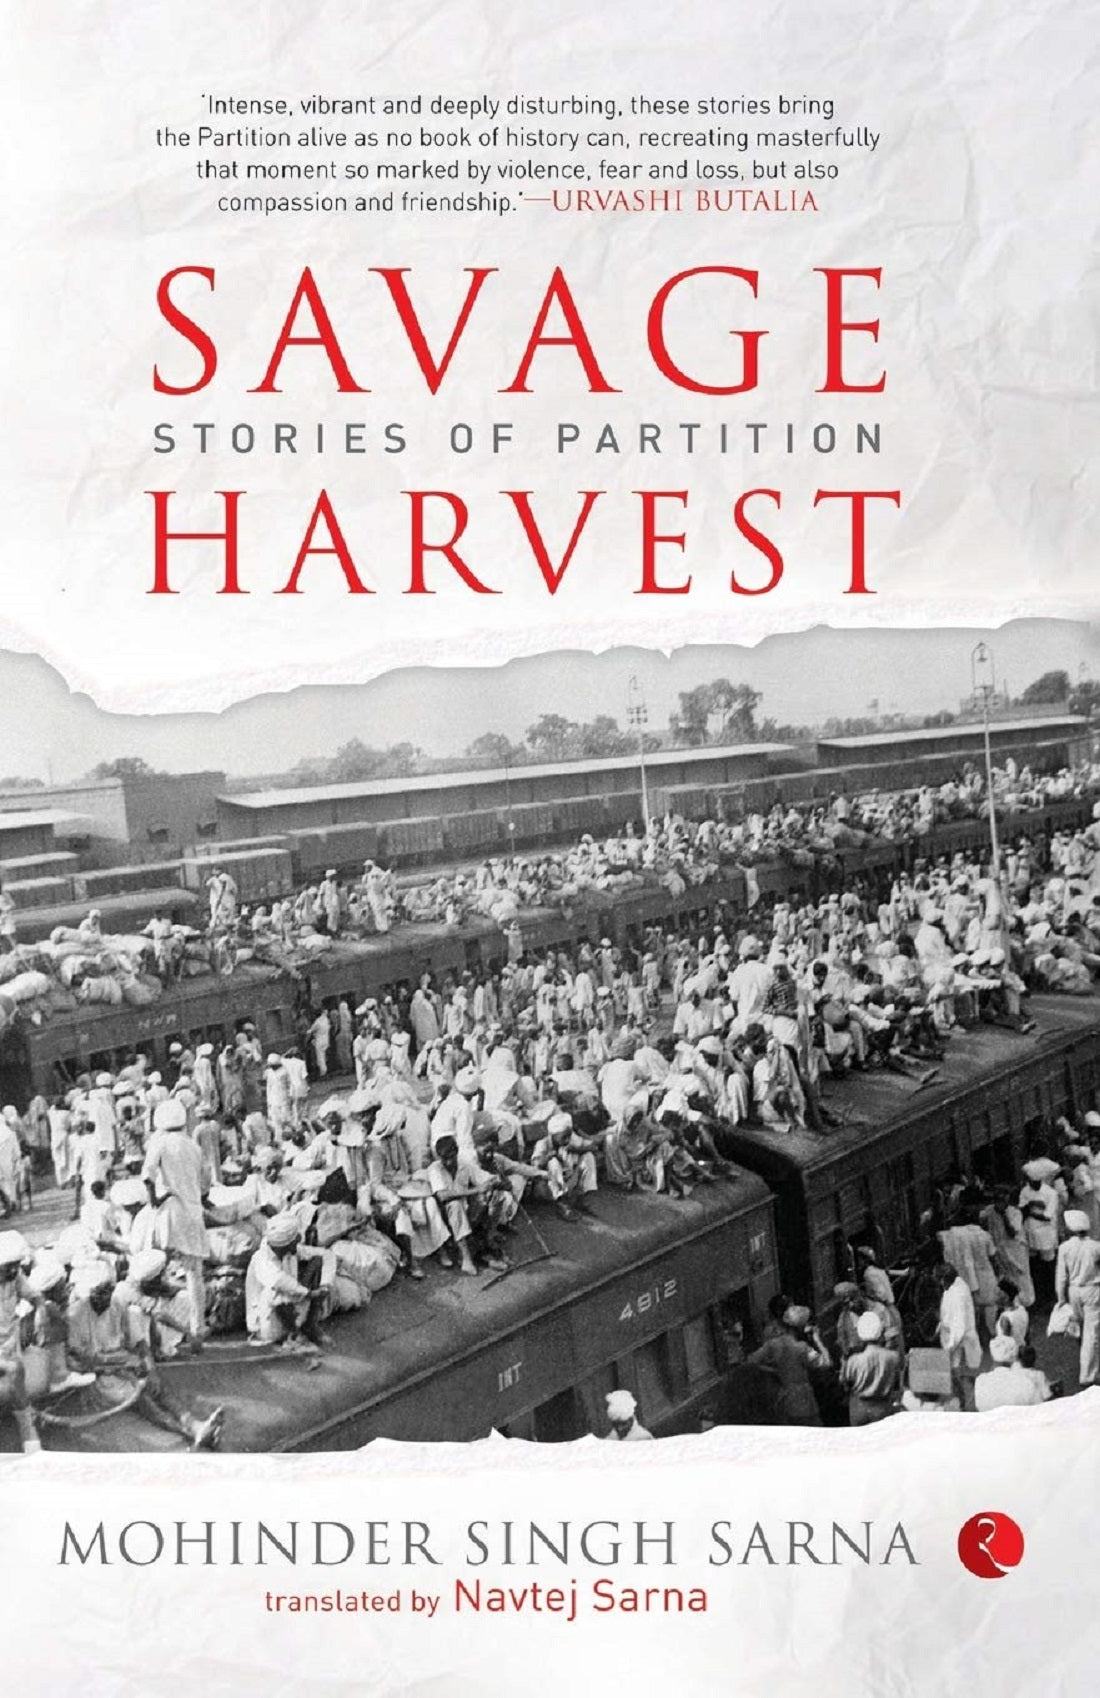 SAVAGE HARVEST - STORIES OF PARTITION